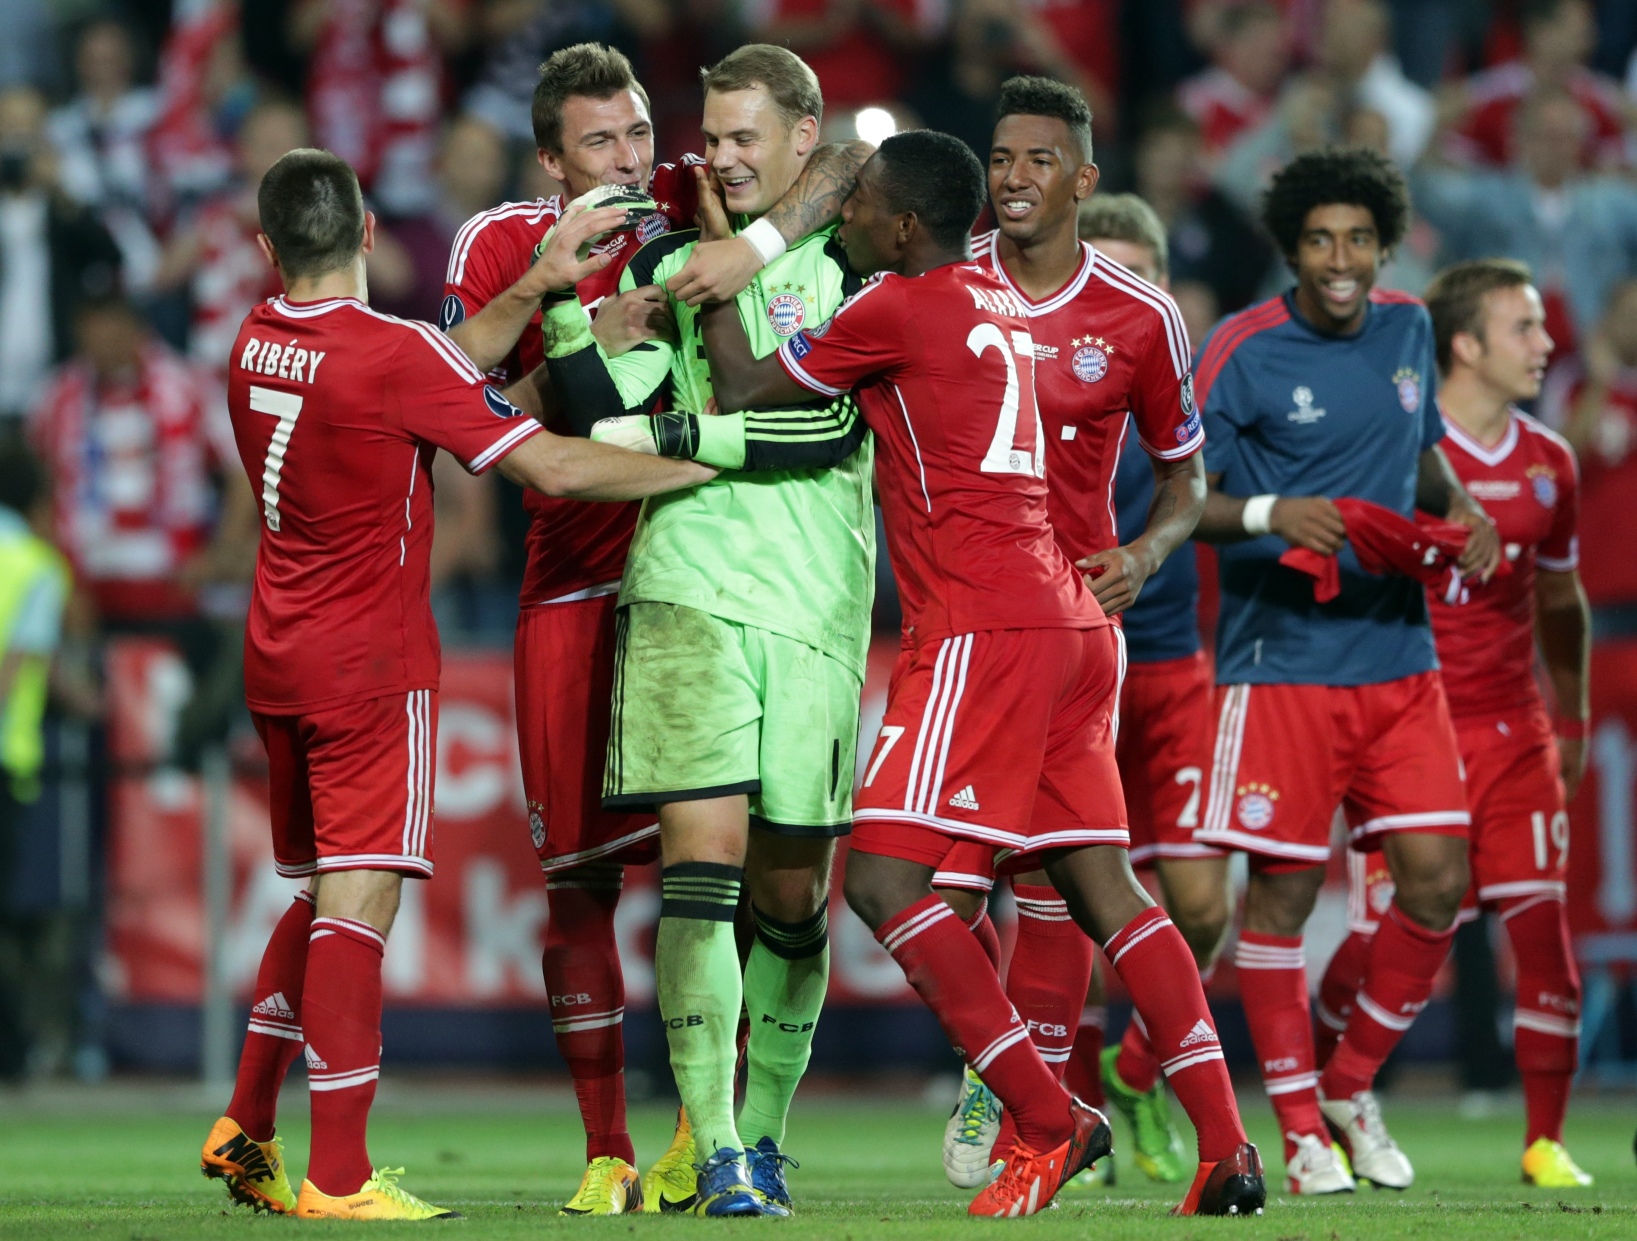 Bayern goalkeeper Manuel Neuer (3rd left) hugged by teammates after he saved a penalty to win the soccer Super Cup final between Champions League winner Bayern Munich and Europa League winner Chelsea FC. Photo: AP